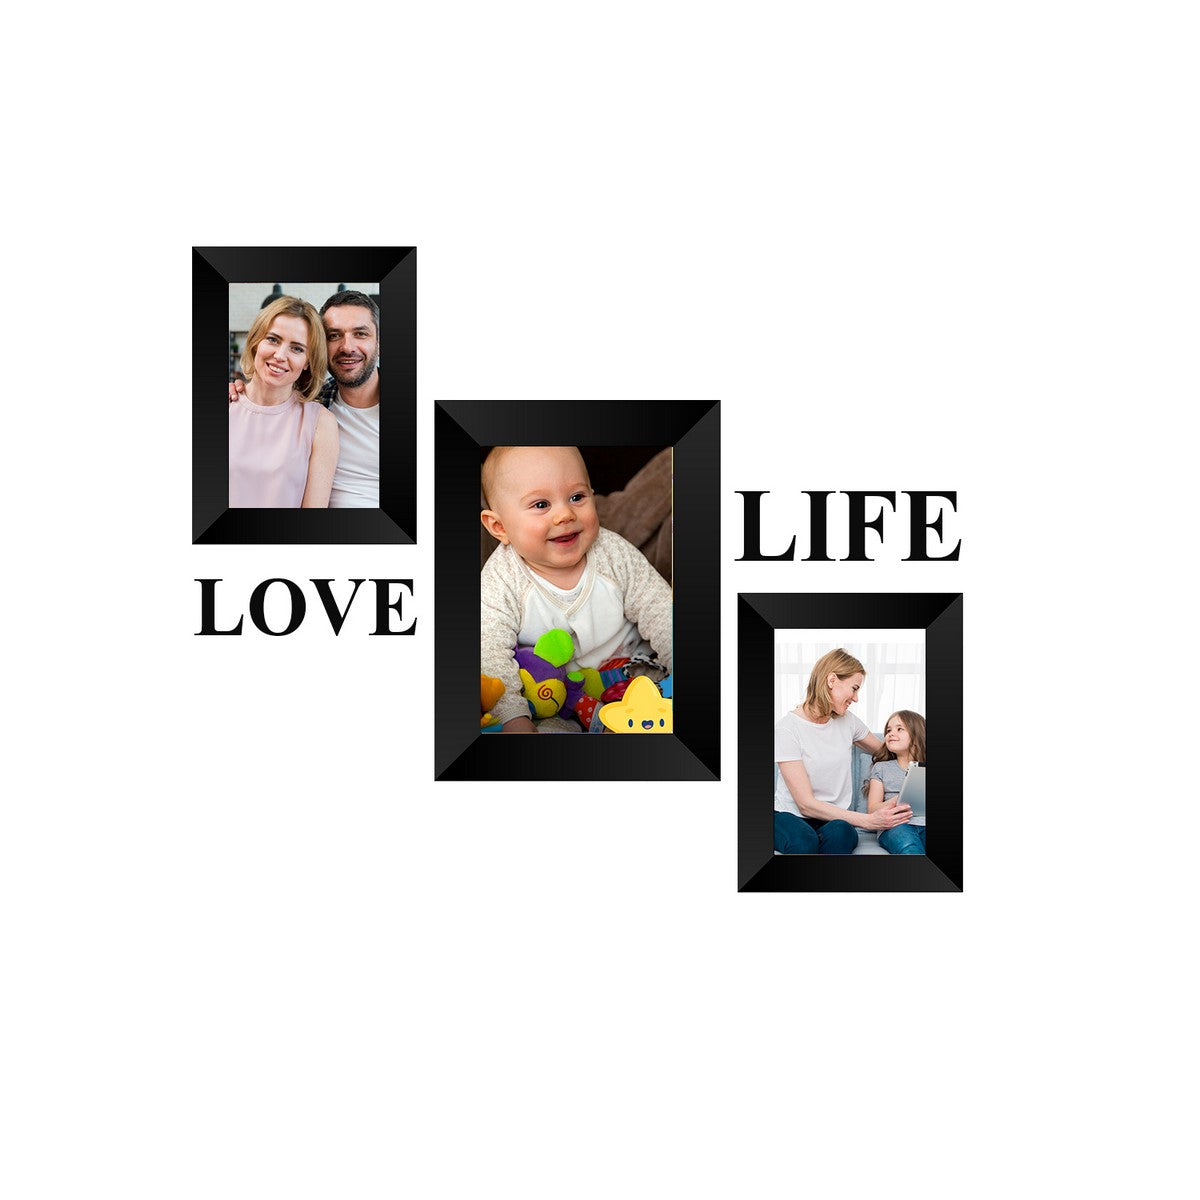 Memory Wall Collage Photo Frame - Set of 3 Photo Frames for 2 Photos of 4"x6", 1 Photos of 5"x7", 1 Piece of LOVE, 1 Piece of LIFE